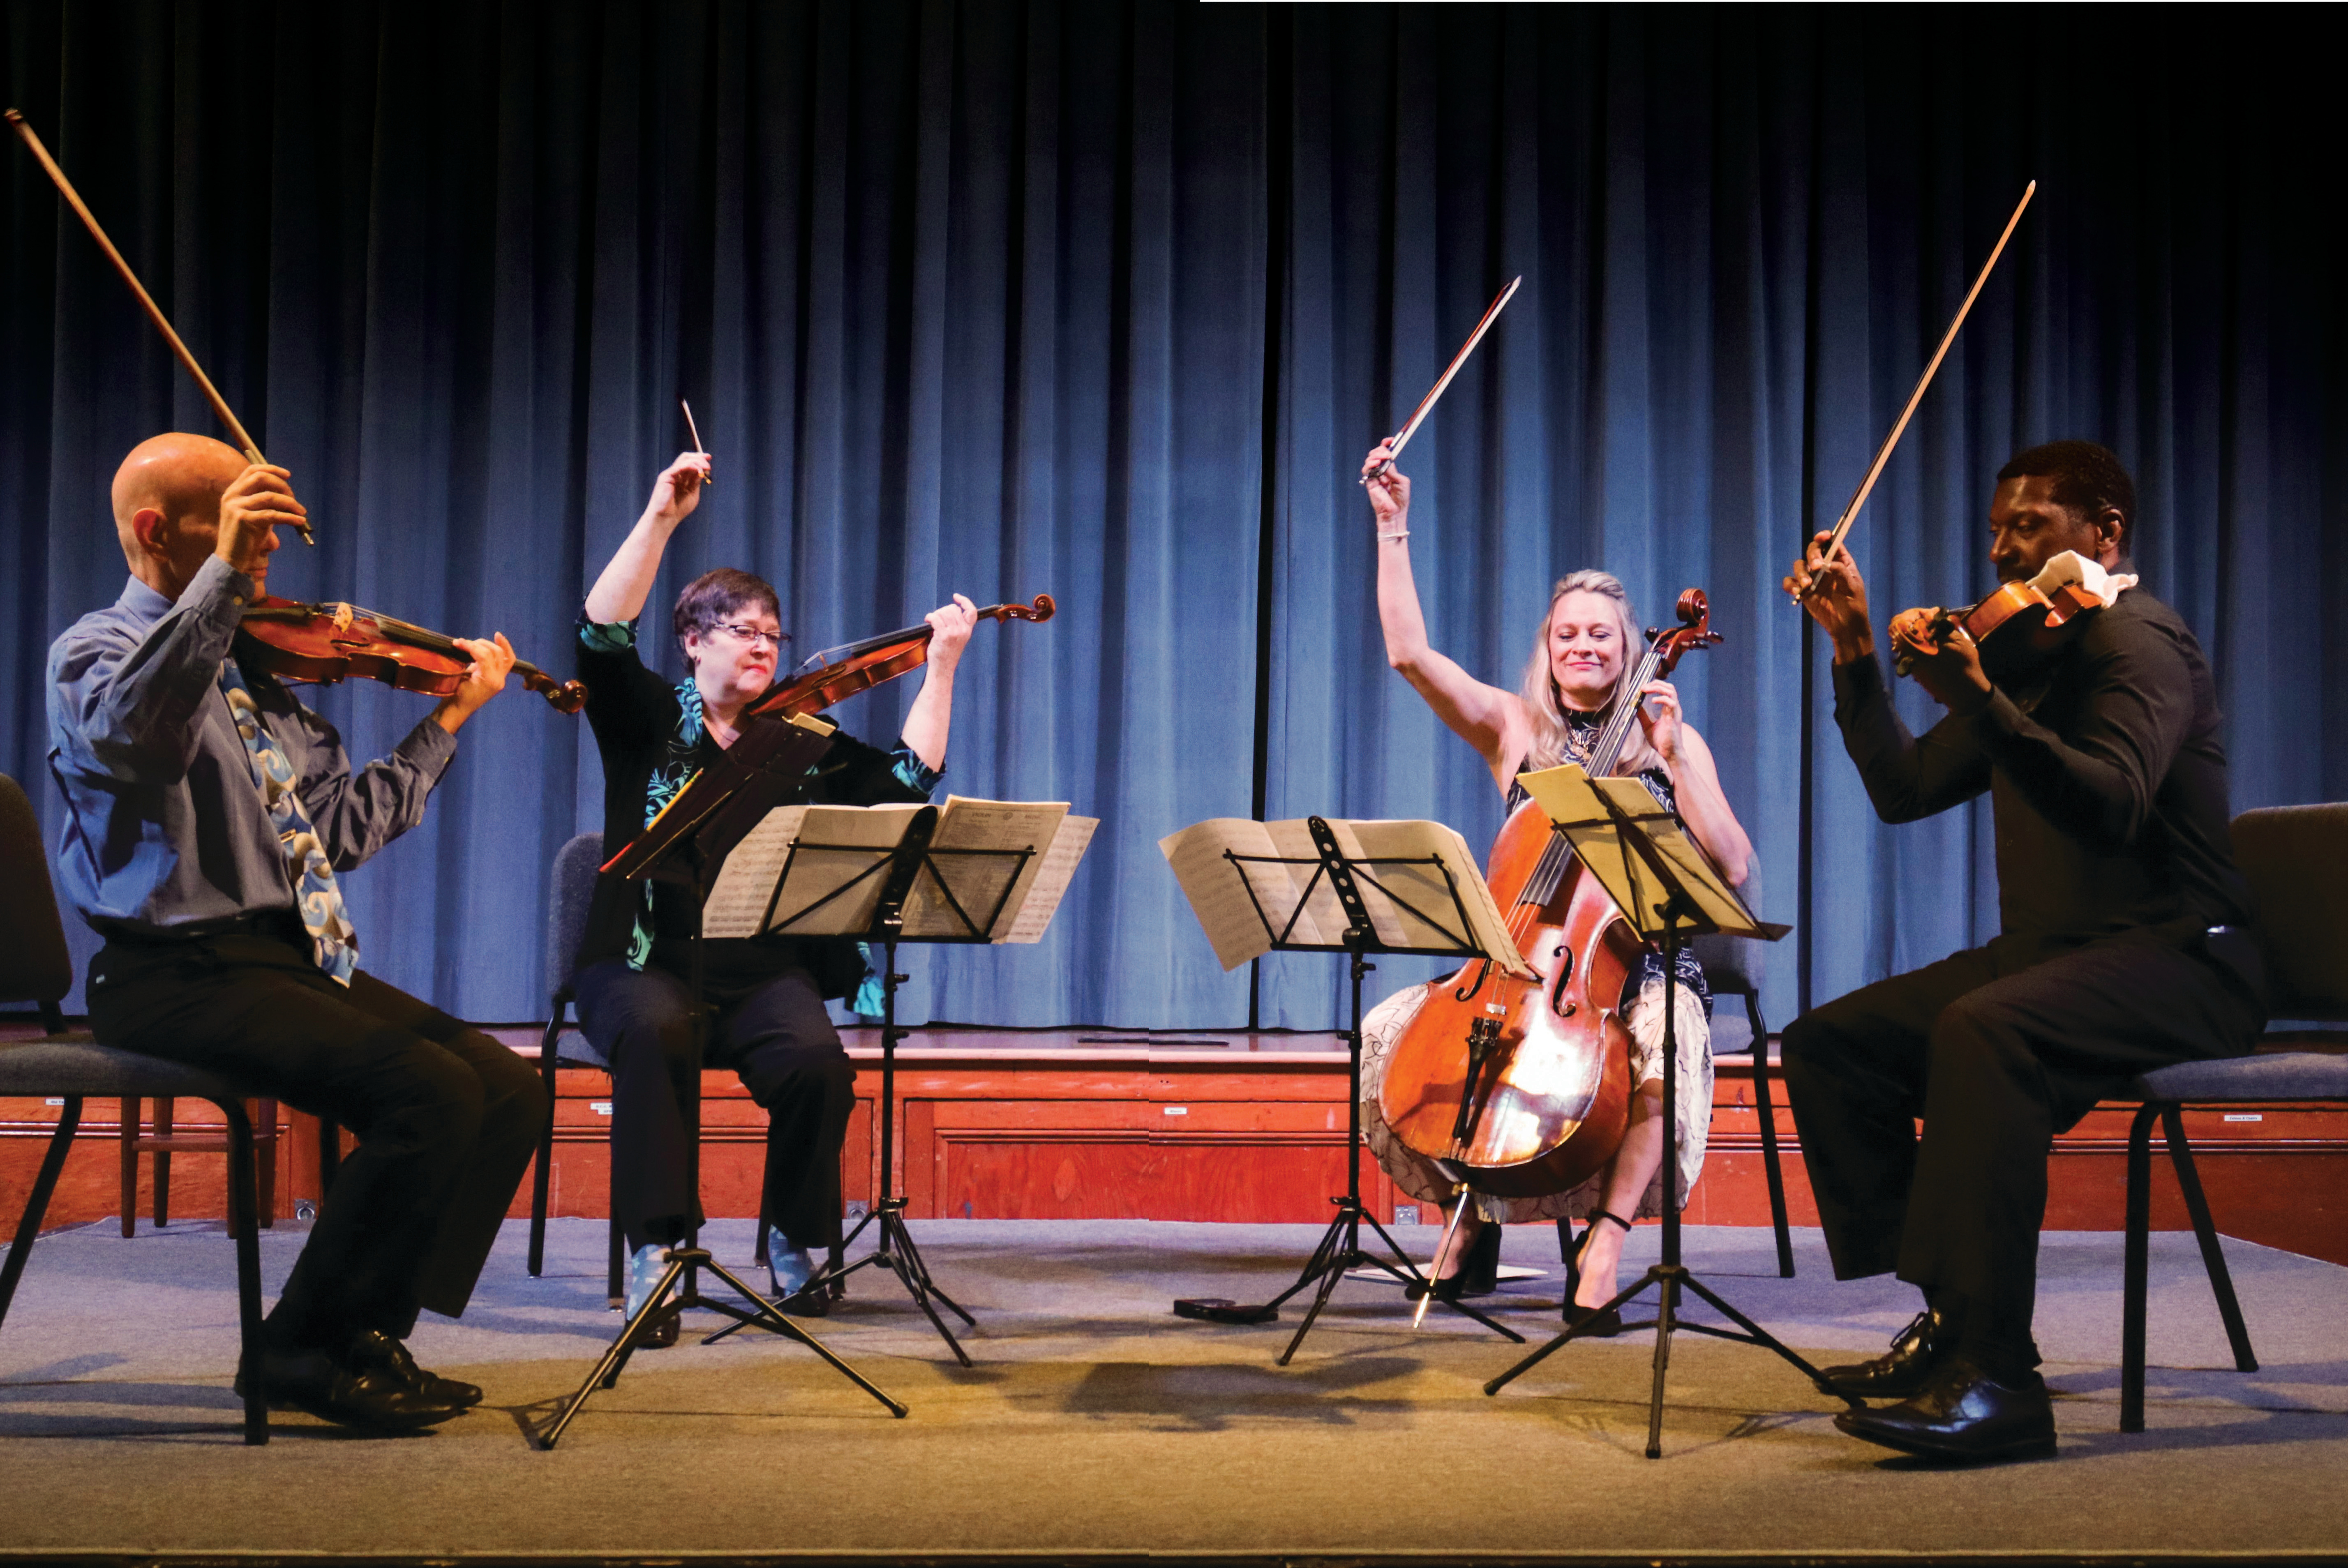 The Serafin Summer Music Festival offers chamber music over three weekends and features performances from world-famous musicians who travel to Delaware from across the country to take part. From left: Hal Grossman, violin; Kate Ransom, violin; Charae Krueger, cello; and Amadi Azikiwe, viola.